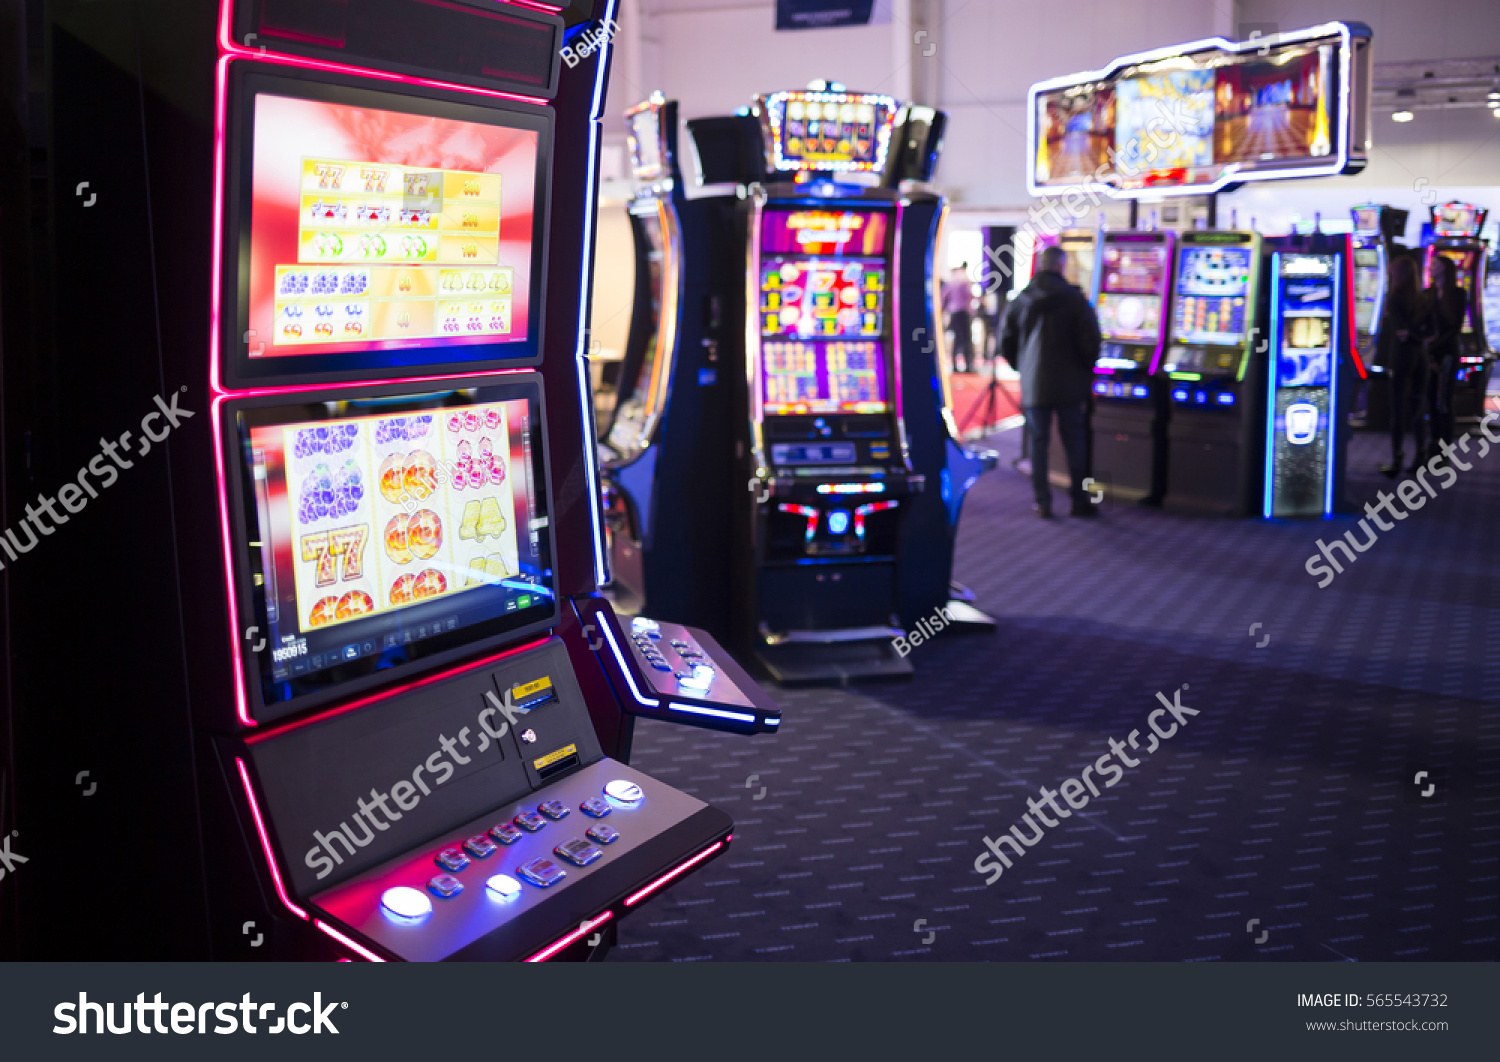 A slot machine is seen in a casino room with people playing other slot machines in the background. #565543732